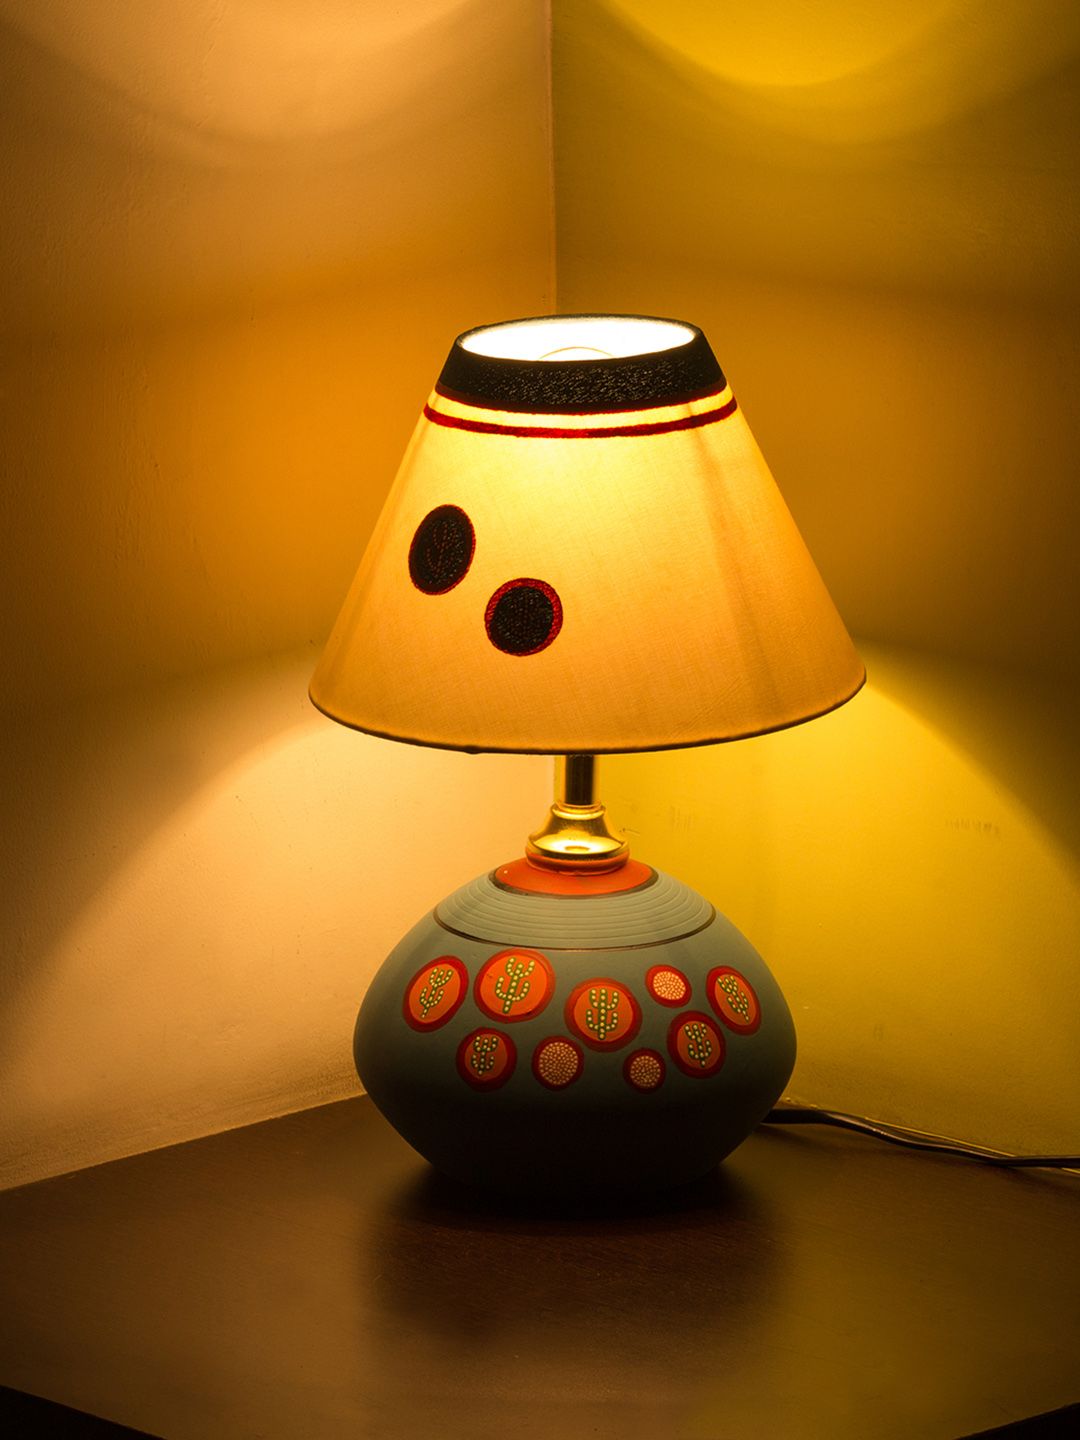 ExclusiveLane Teal Textured Hand-Painted Oasis in Light Matki Shaped Terracotta Table Lamp Price in India